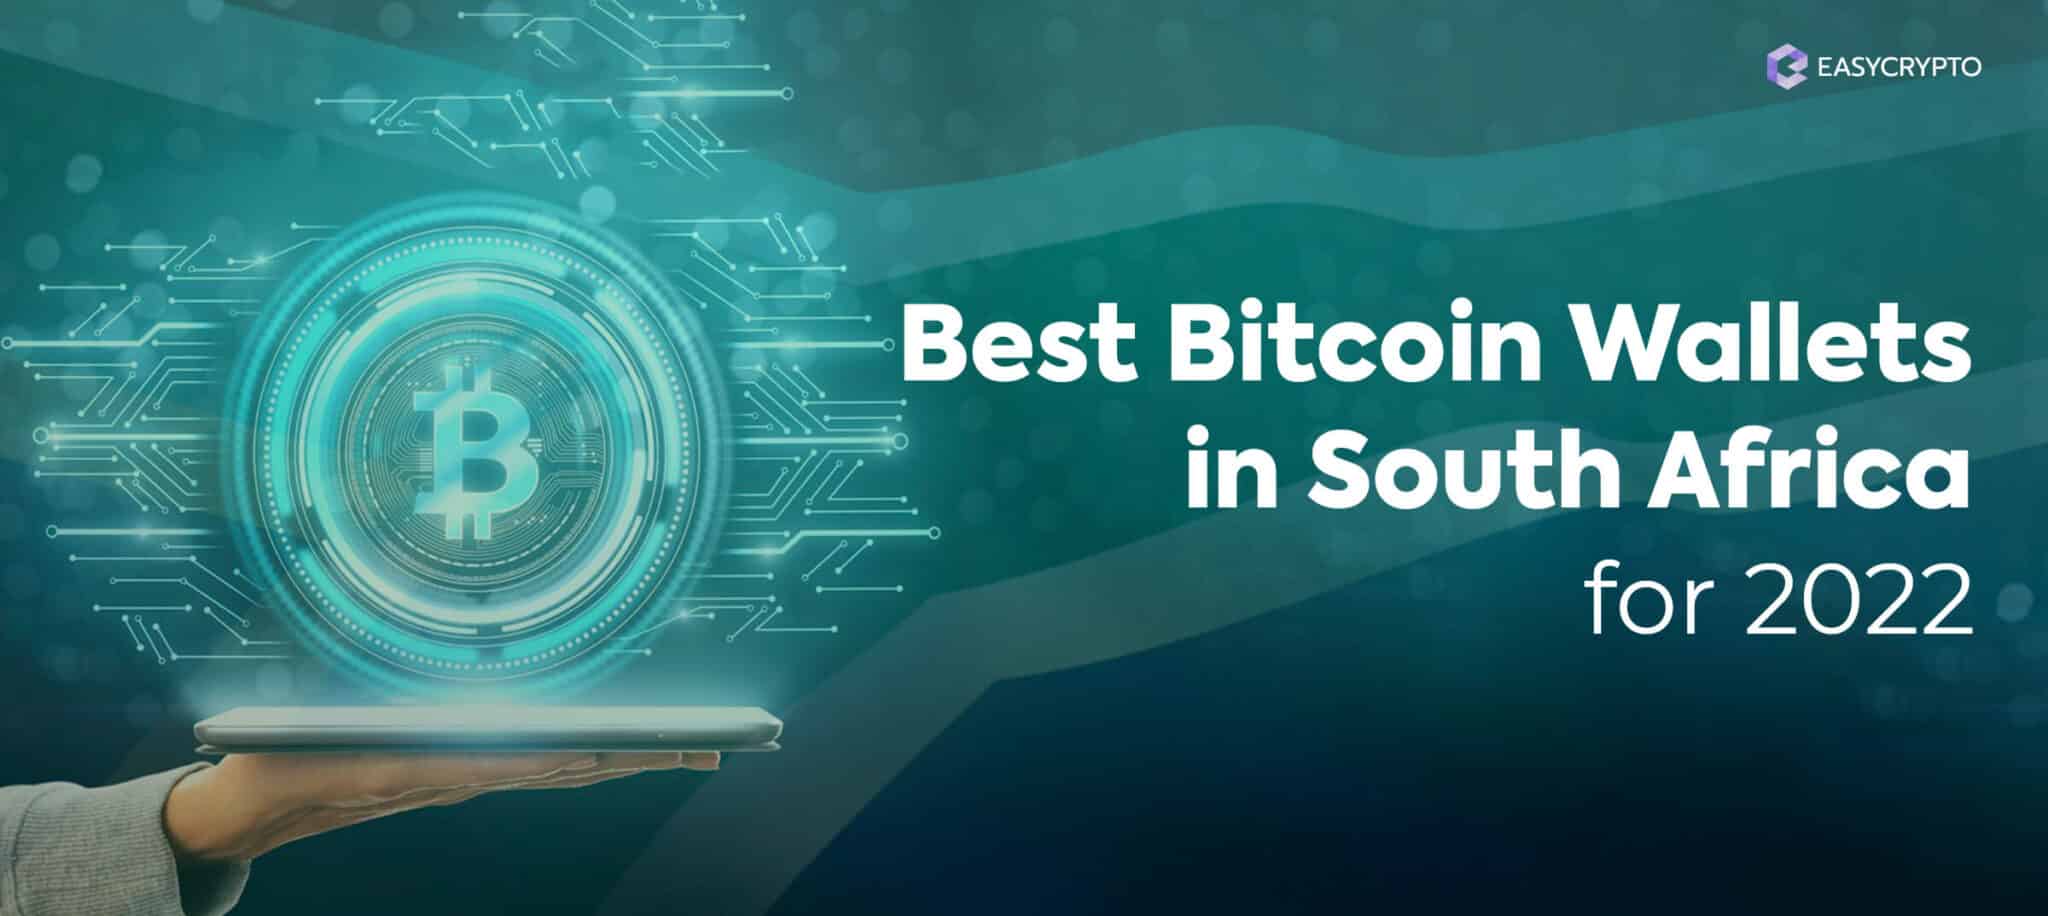 15 Best Crypto & Bitcoin Wallets of March | family-gadgets.ru